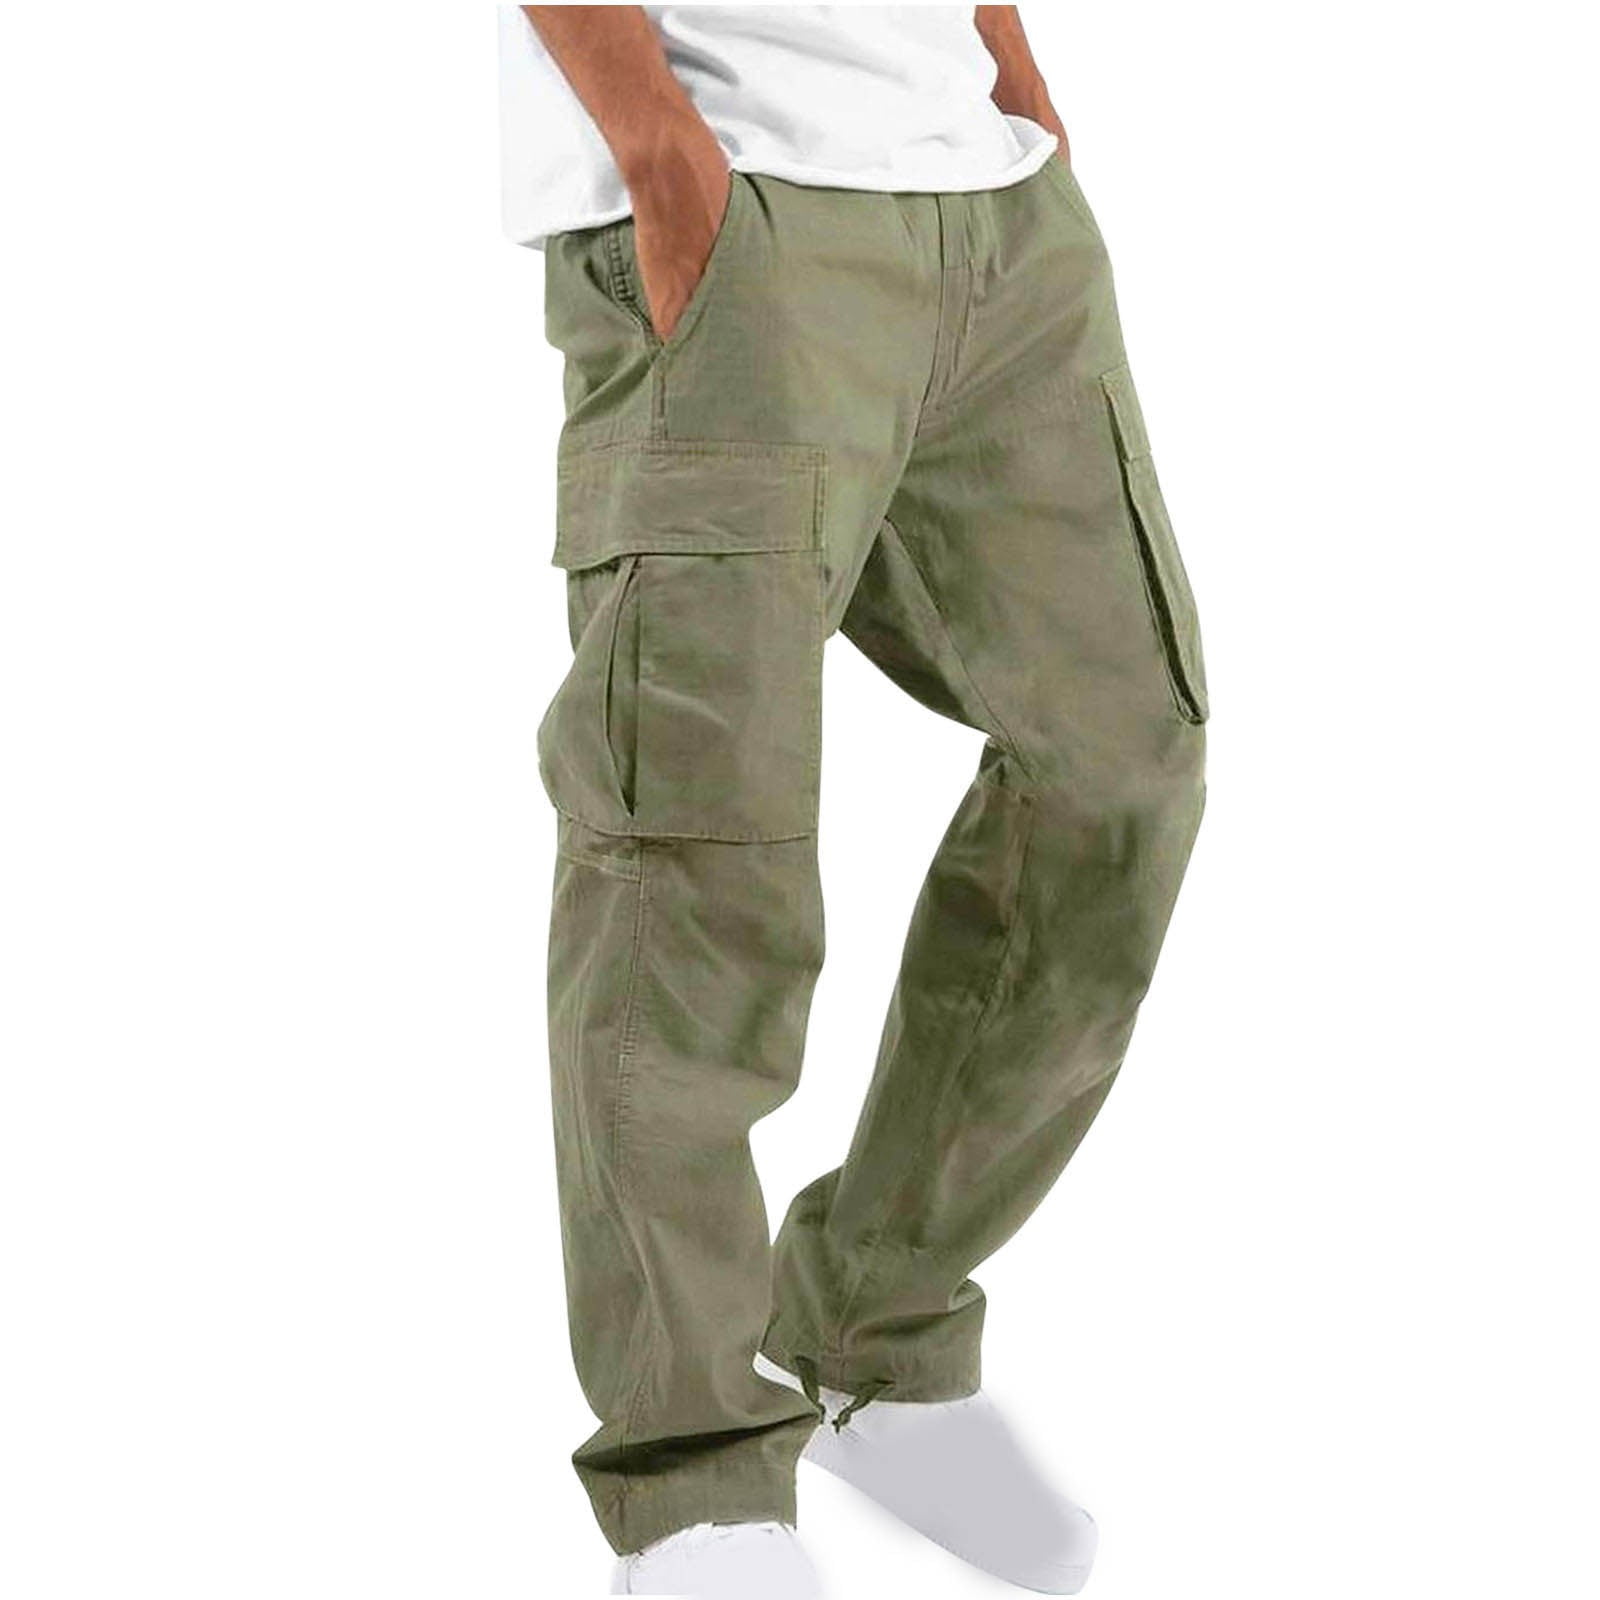 Cargo Pants for Men, Men Solid Casual Multiple Pockets Drawstring Elastic  Waist Fitness Pants Trousers Joggers Sweatpants Day Deal Deals Under 20  Dollars #44 